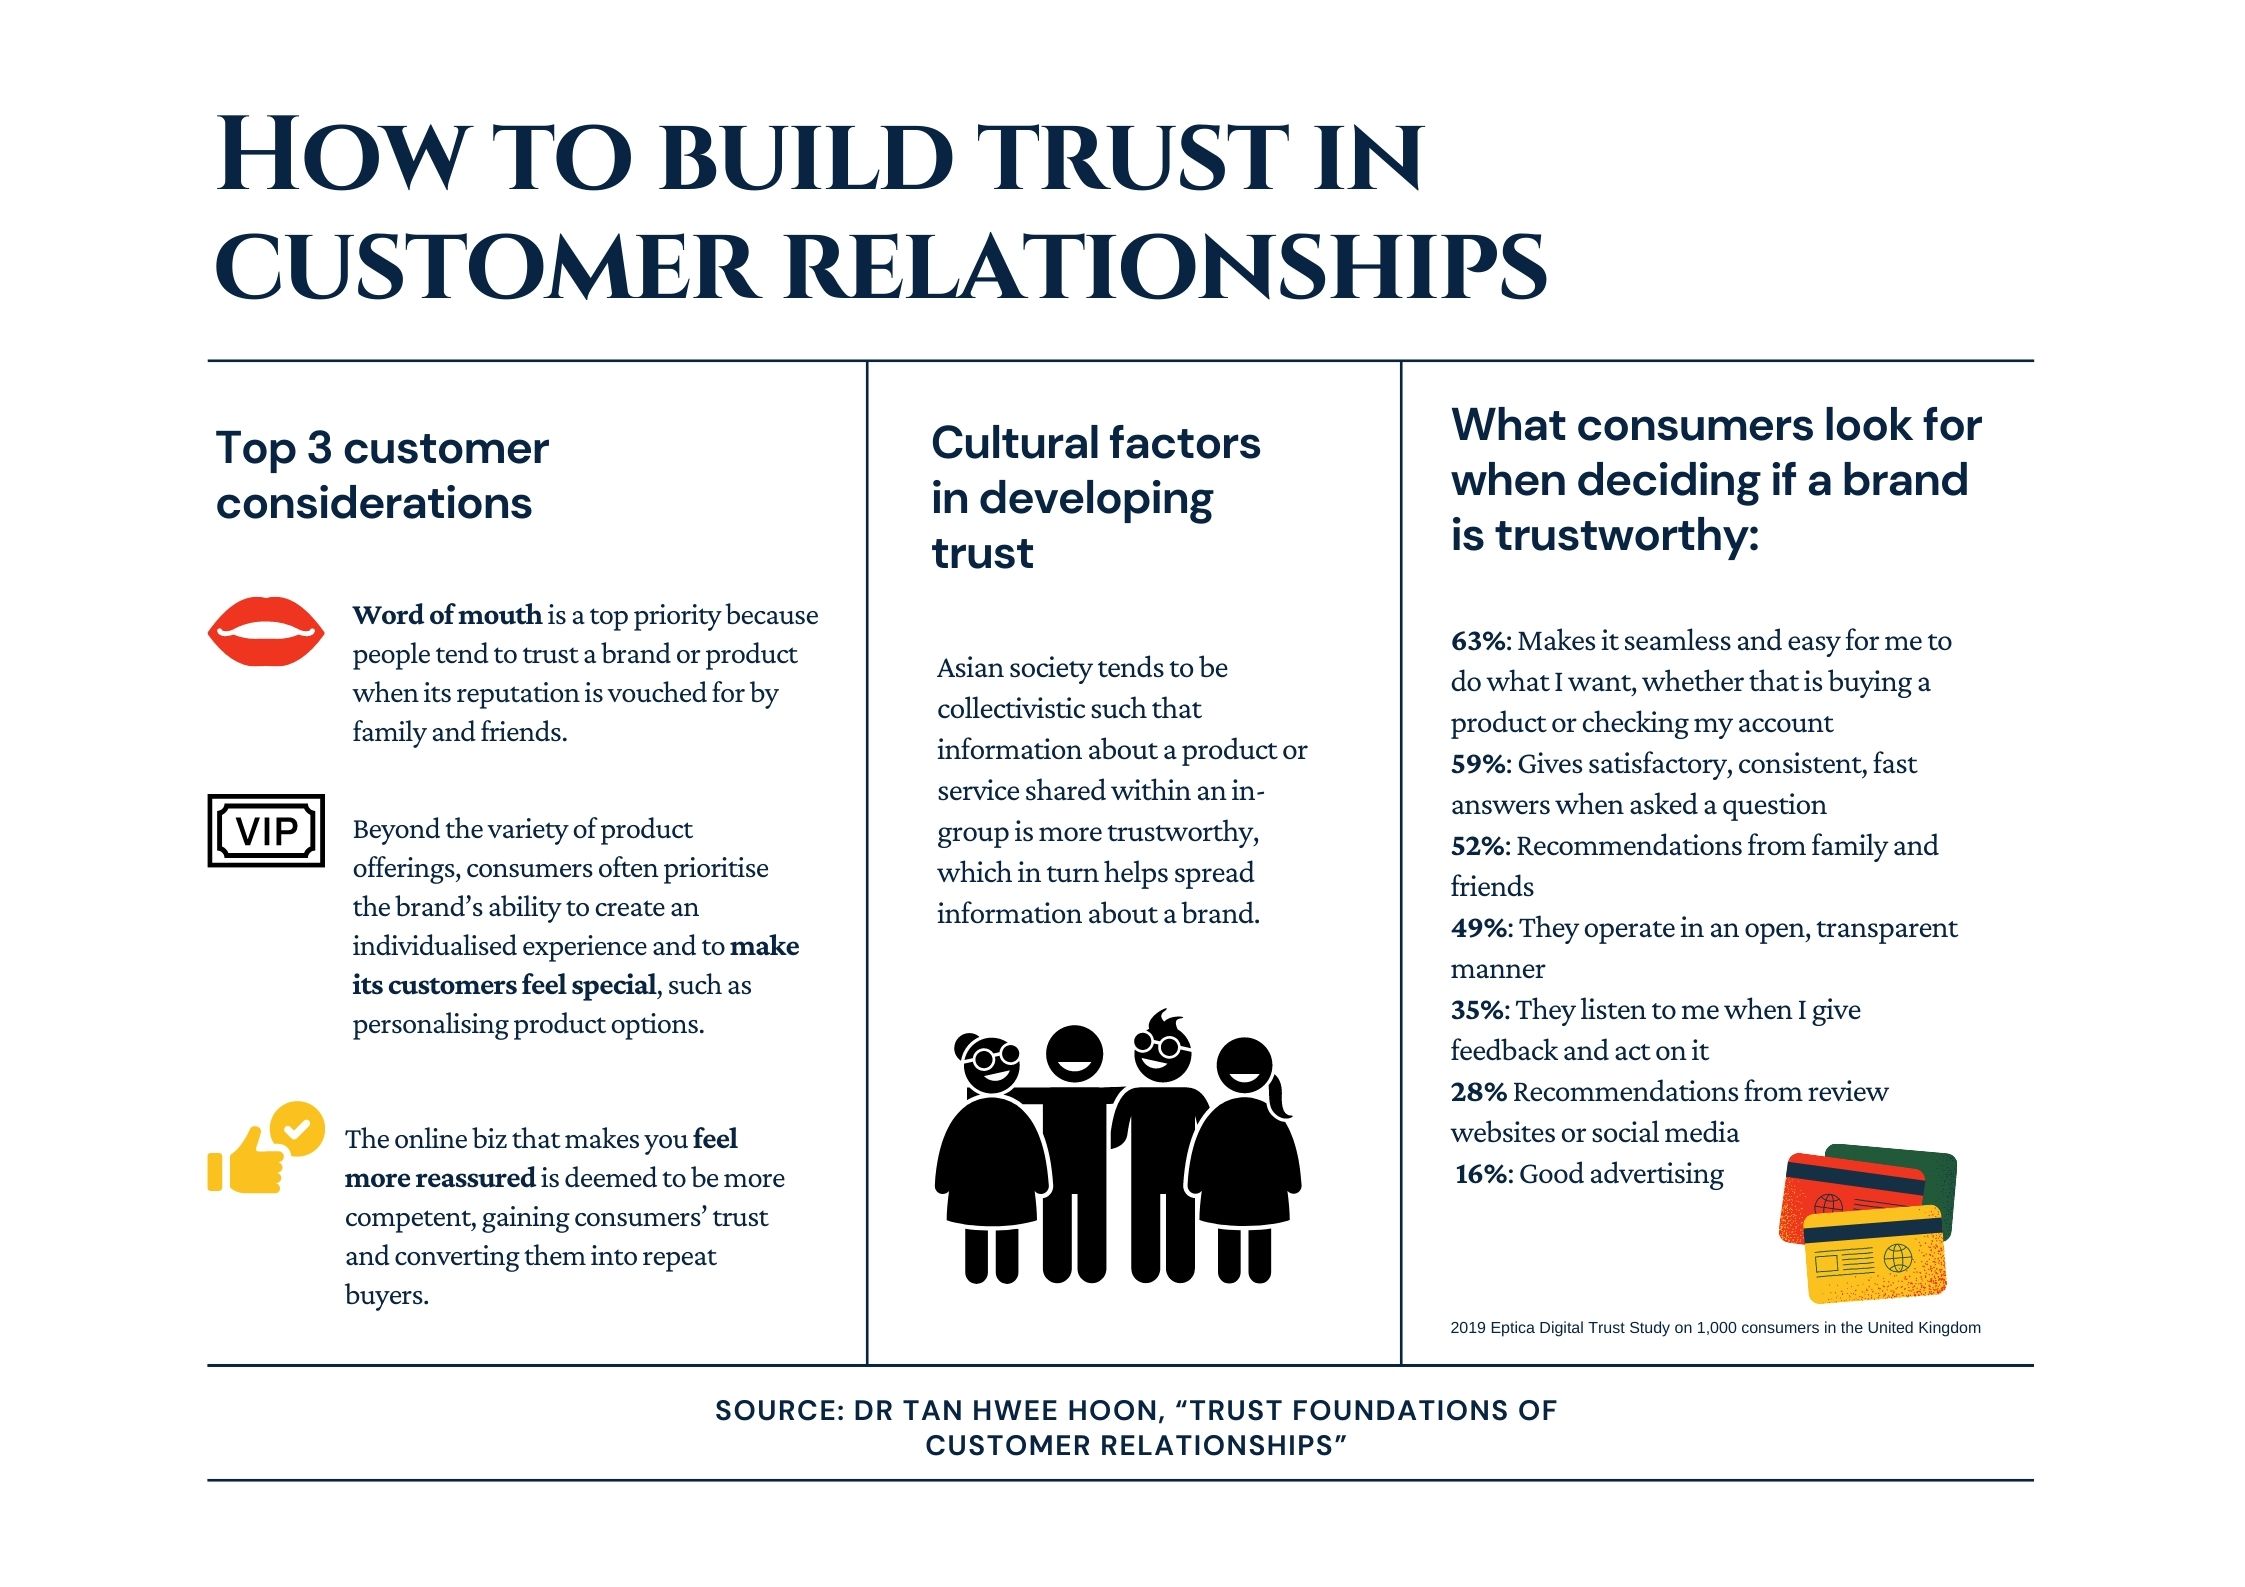 How to build trust in customer relationships